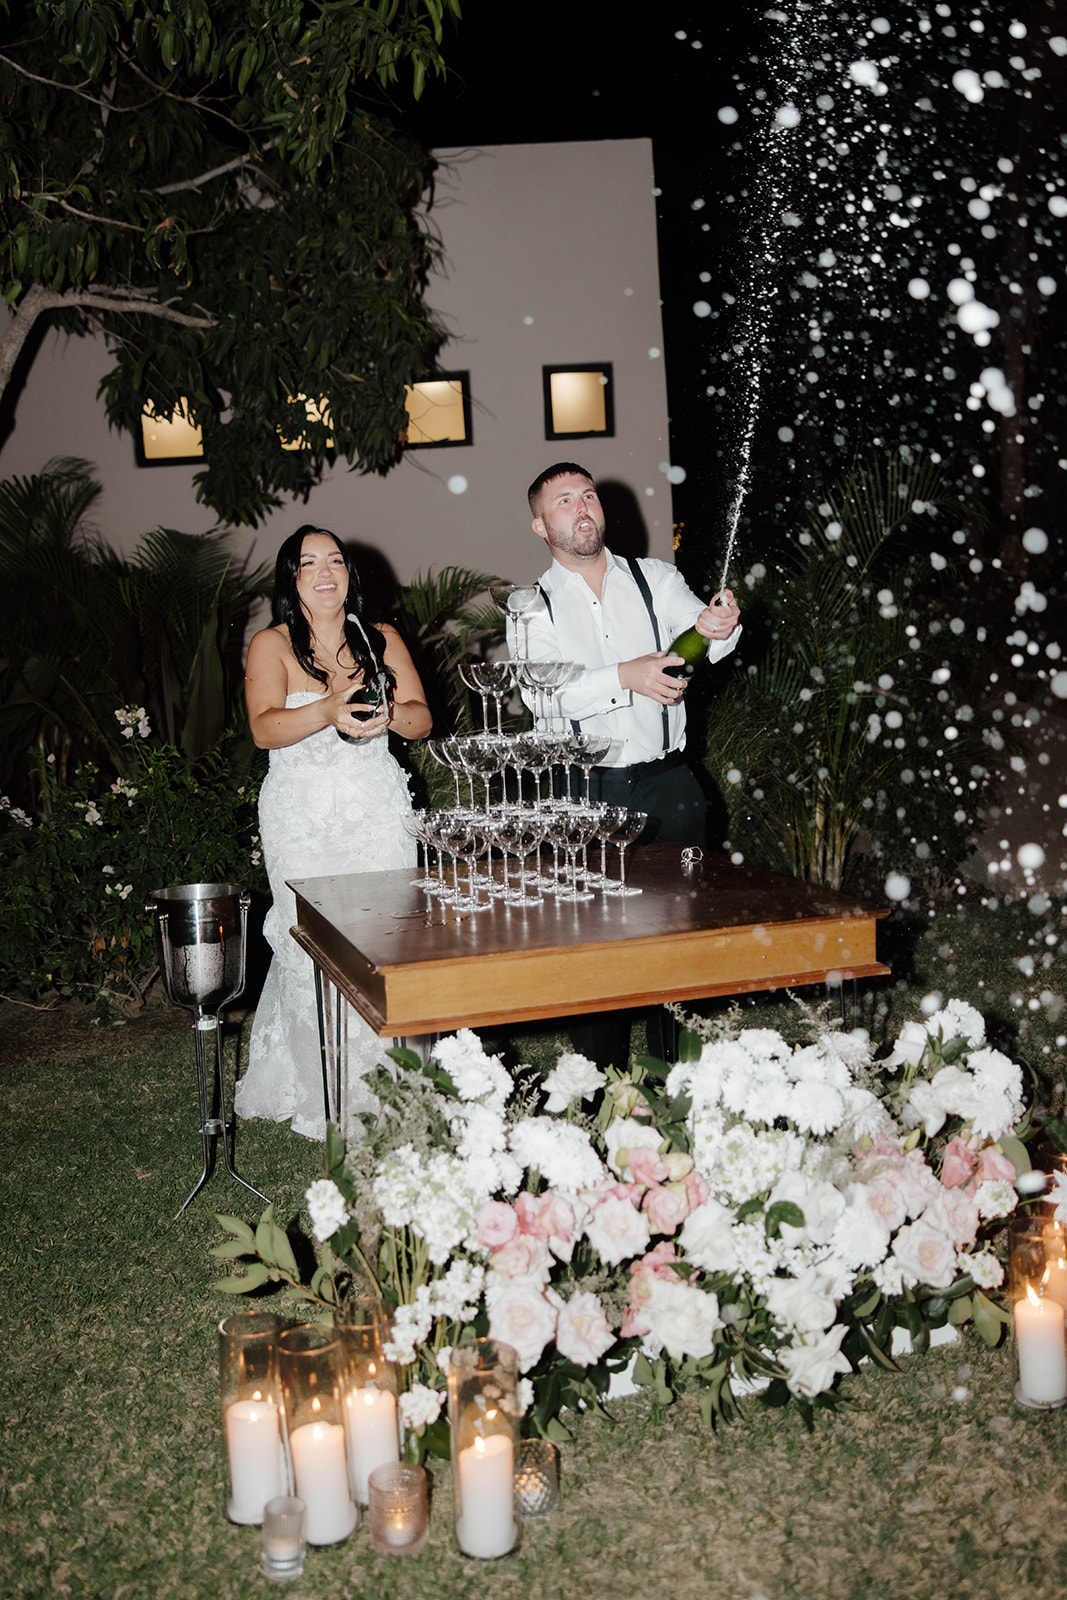 Bride and groom perform a champagne tower pour at their wedding reception.